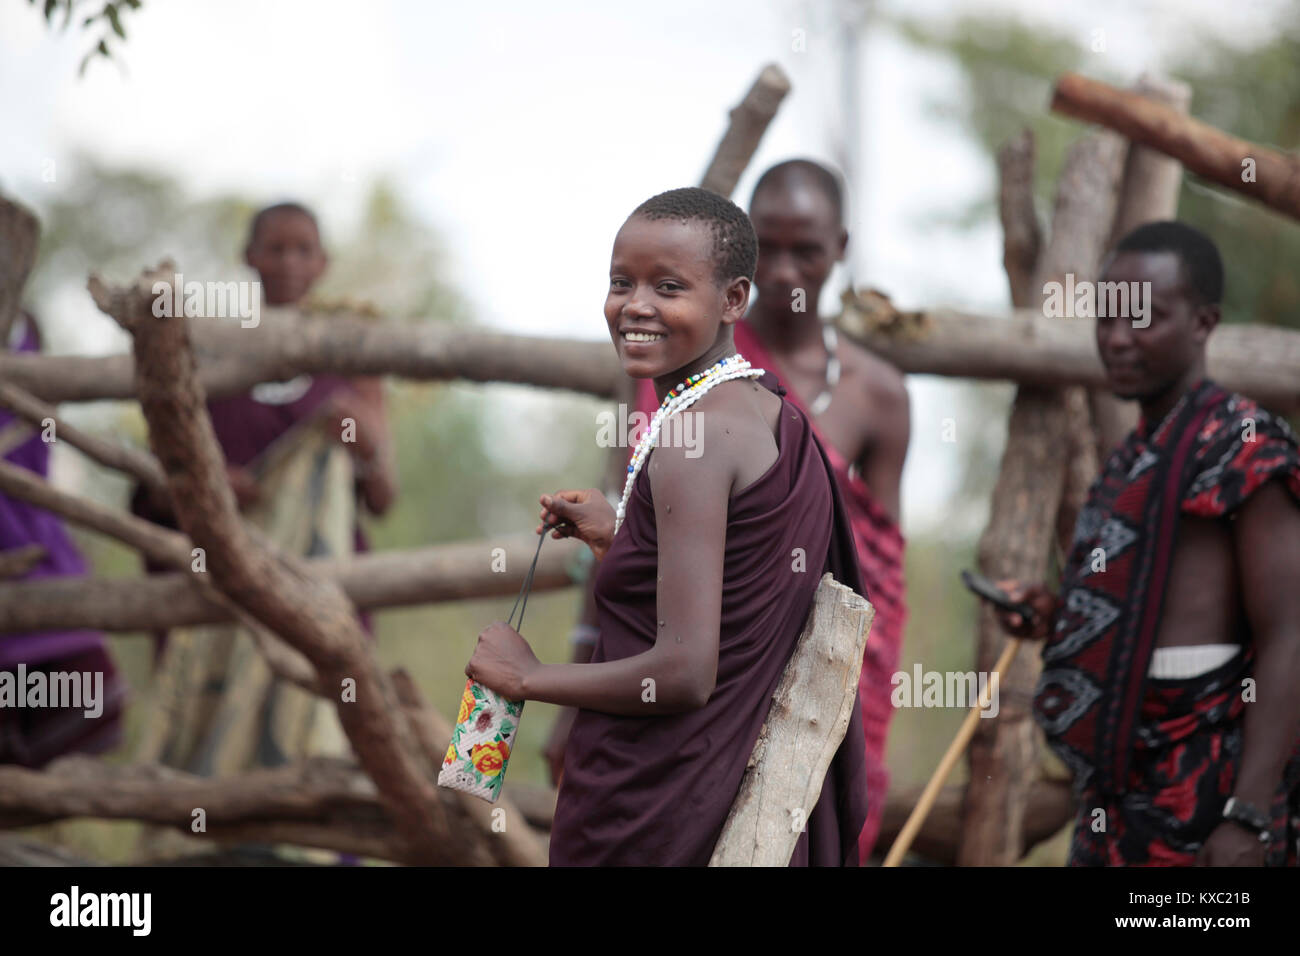 A Maasai woman smiles when taking her photo at Memba forest near Changarawe in Kilosa district, Tanzania on 22 August 2017. Stock Photo